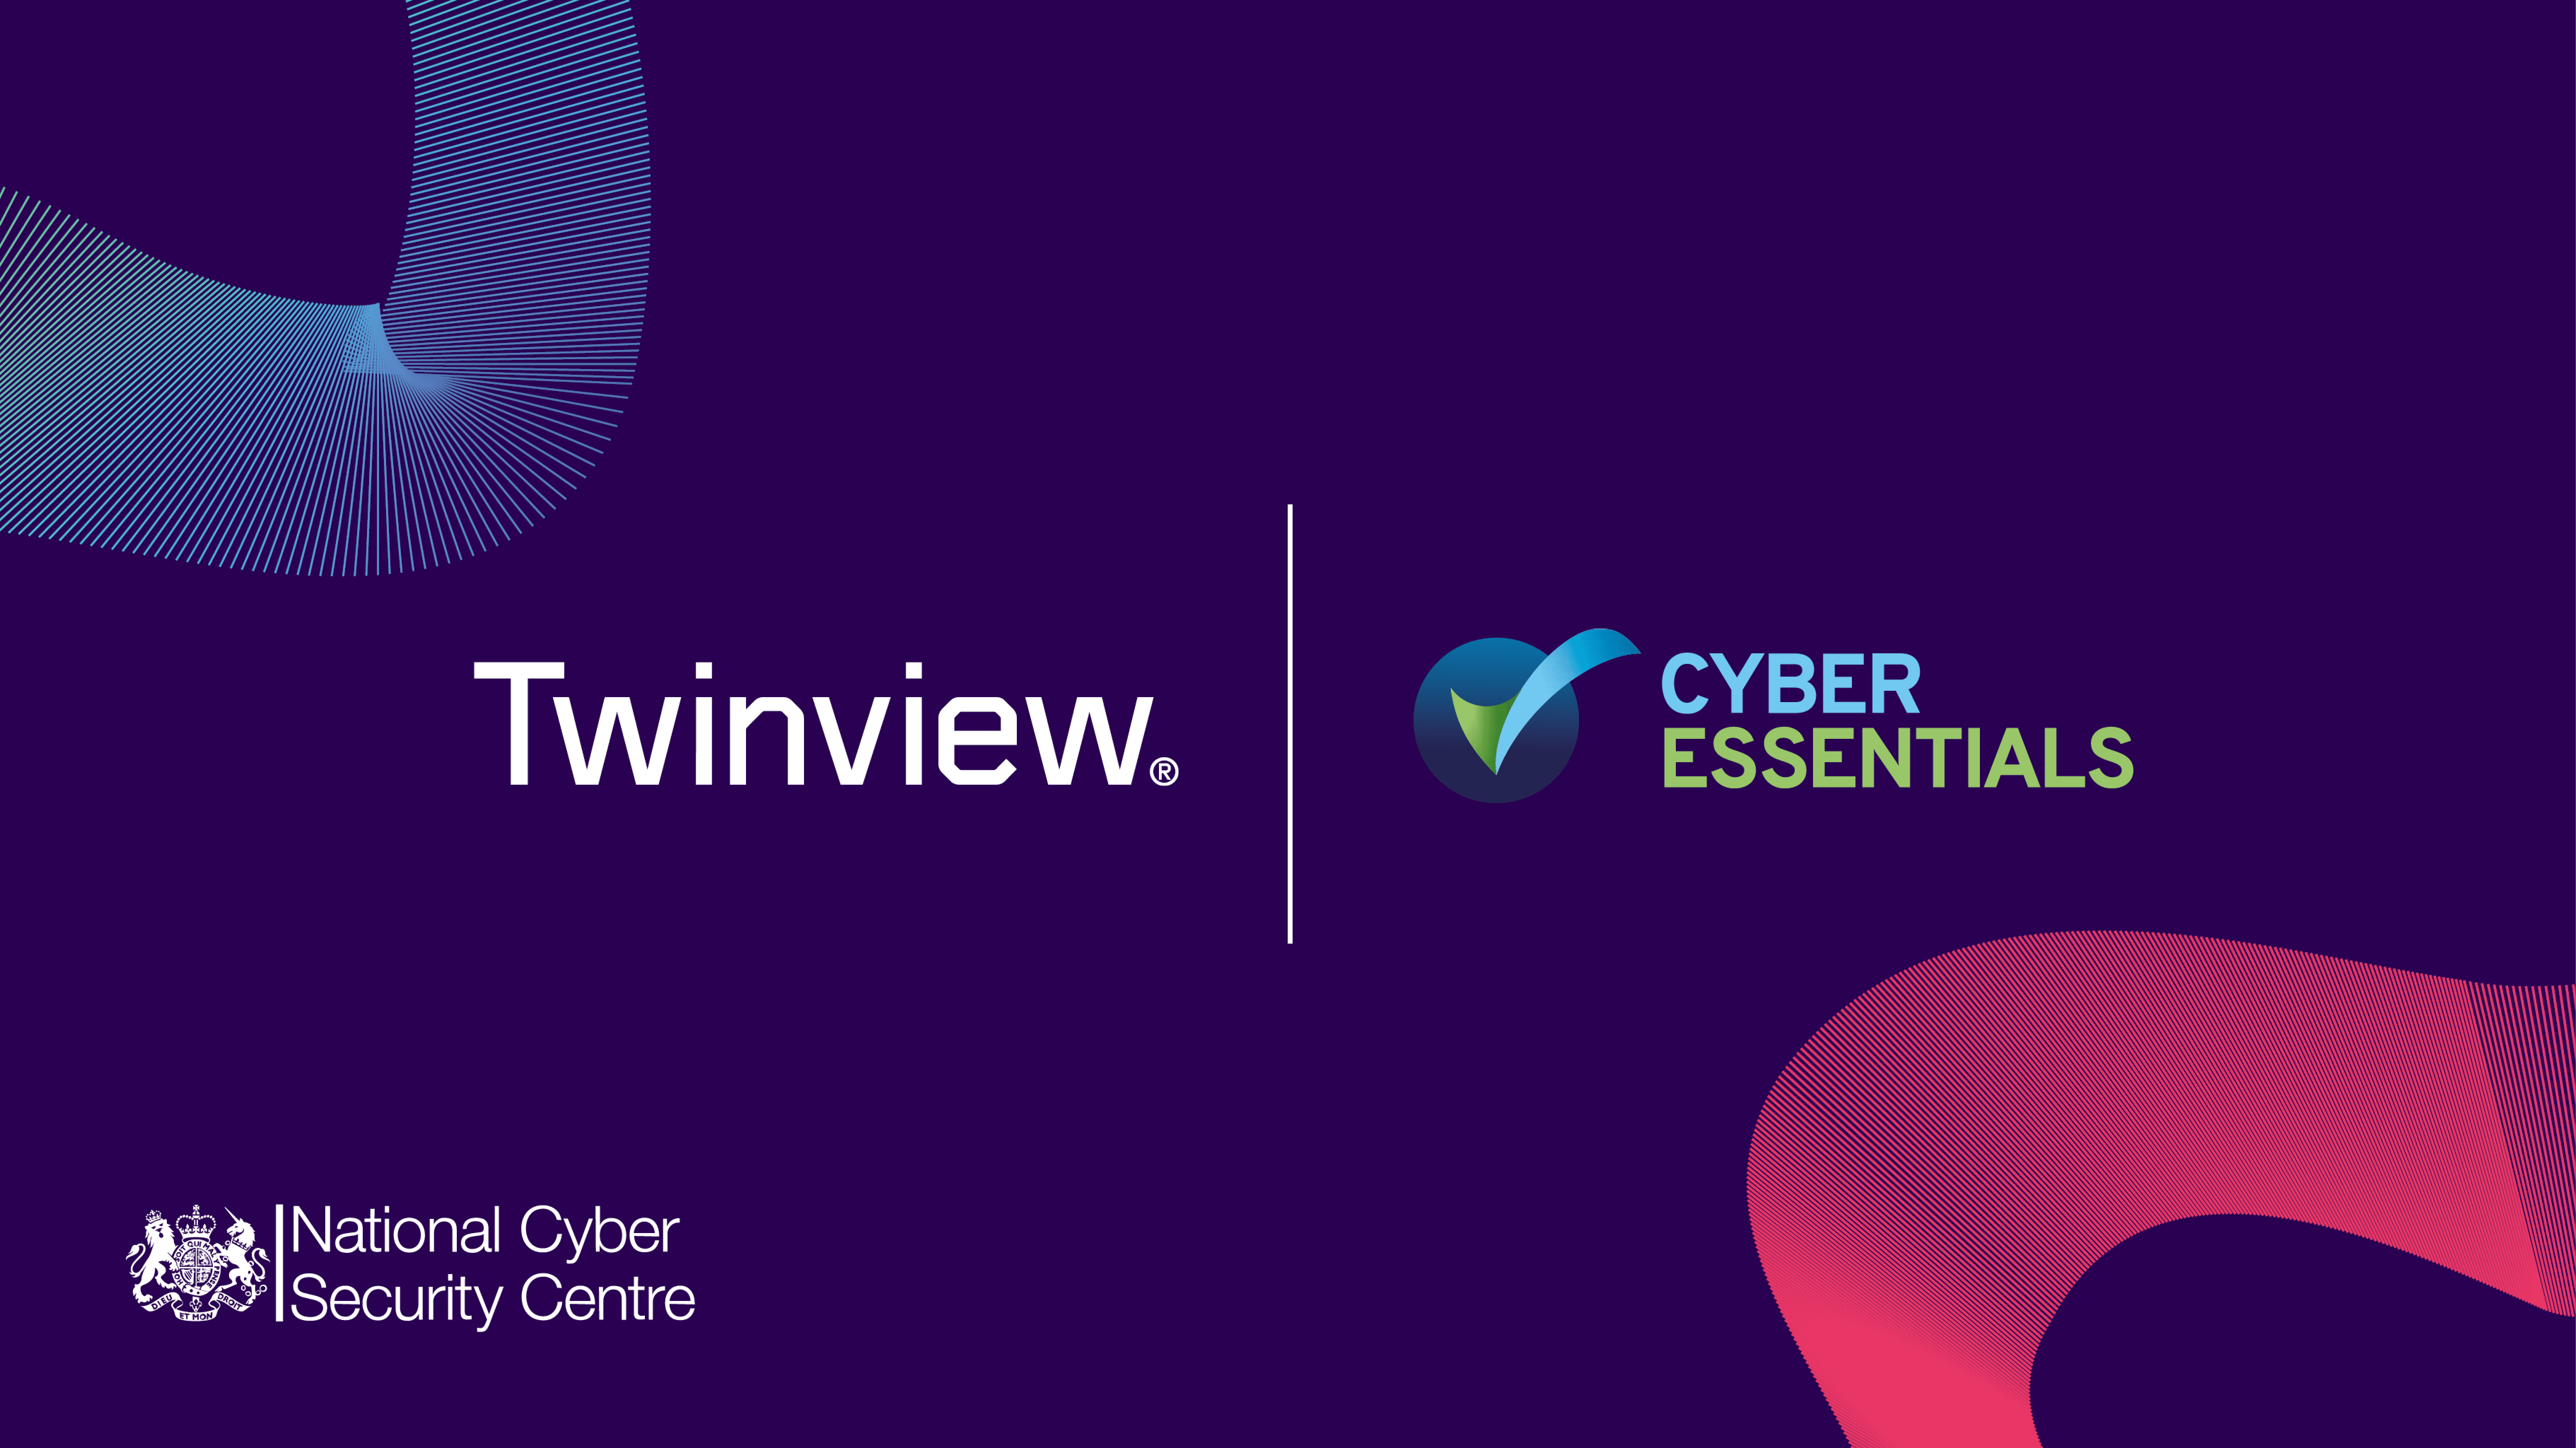 Twinview Is Awarded Cyber Essentials Plus Ce Certification In